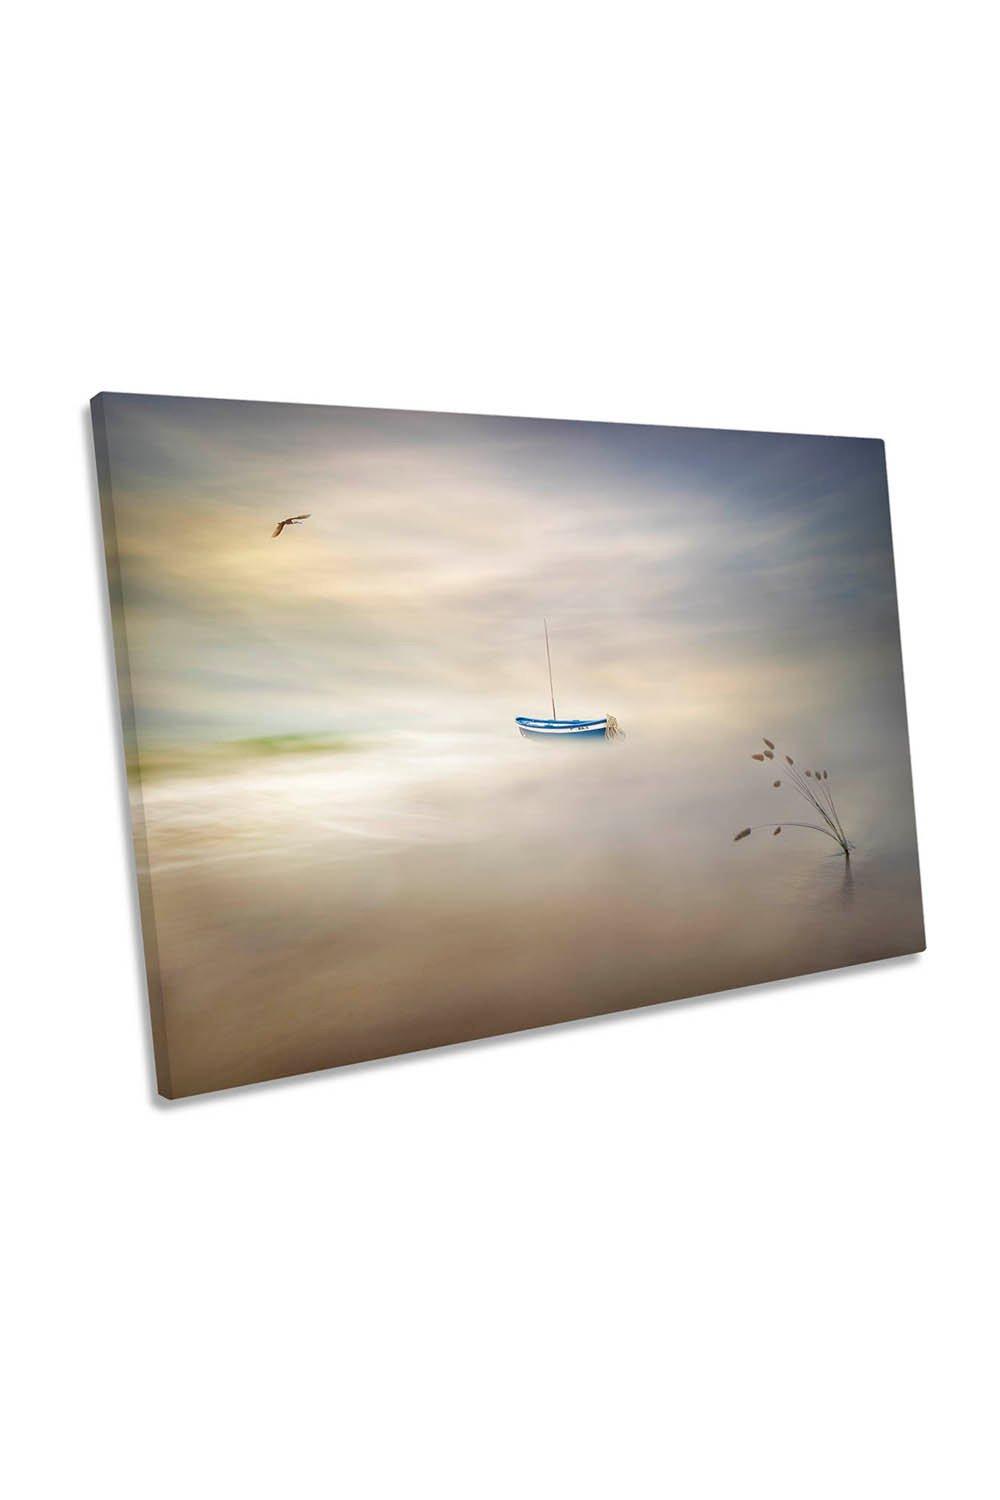 Dreaming of the Sea Blue Boat Misty Canvas Wall Art Picture Print